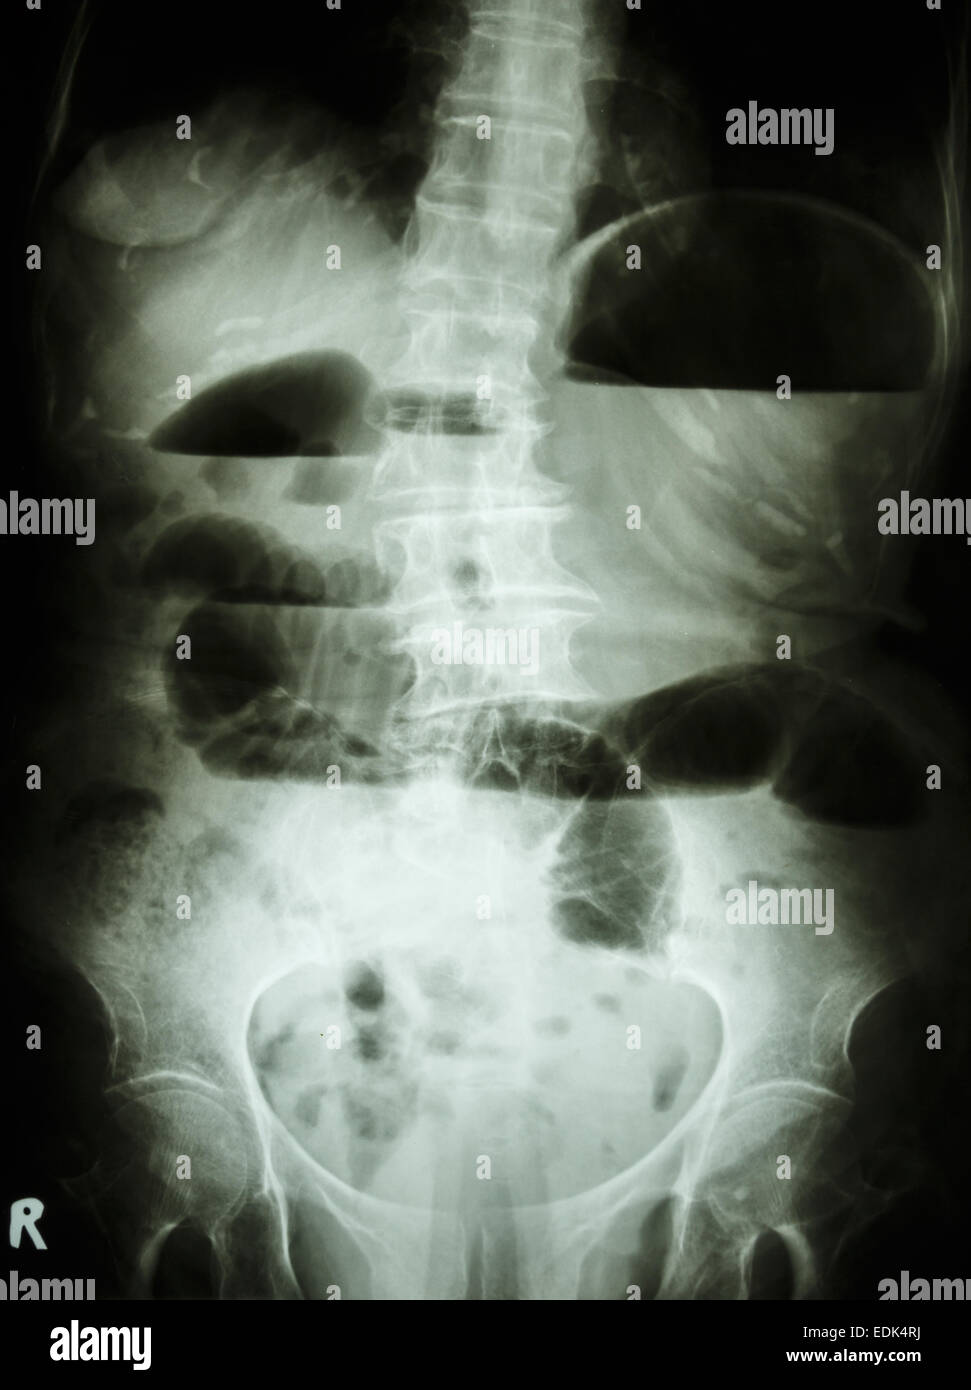 Film X-ray abdomen upright show small bowel dilated and air-fluid level in small bowel due to small bowel obstruction Stock Photo